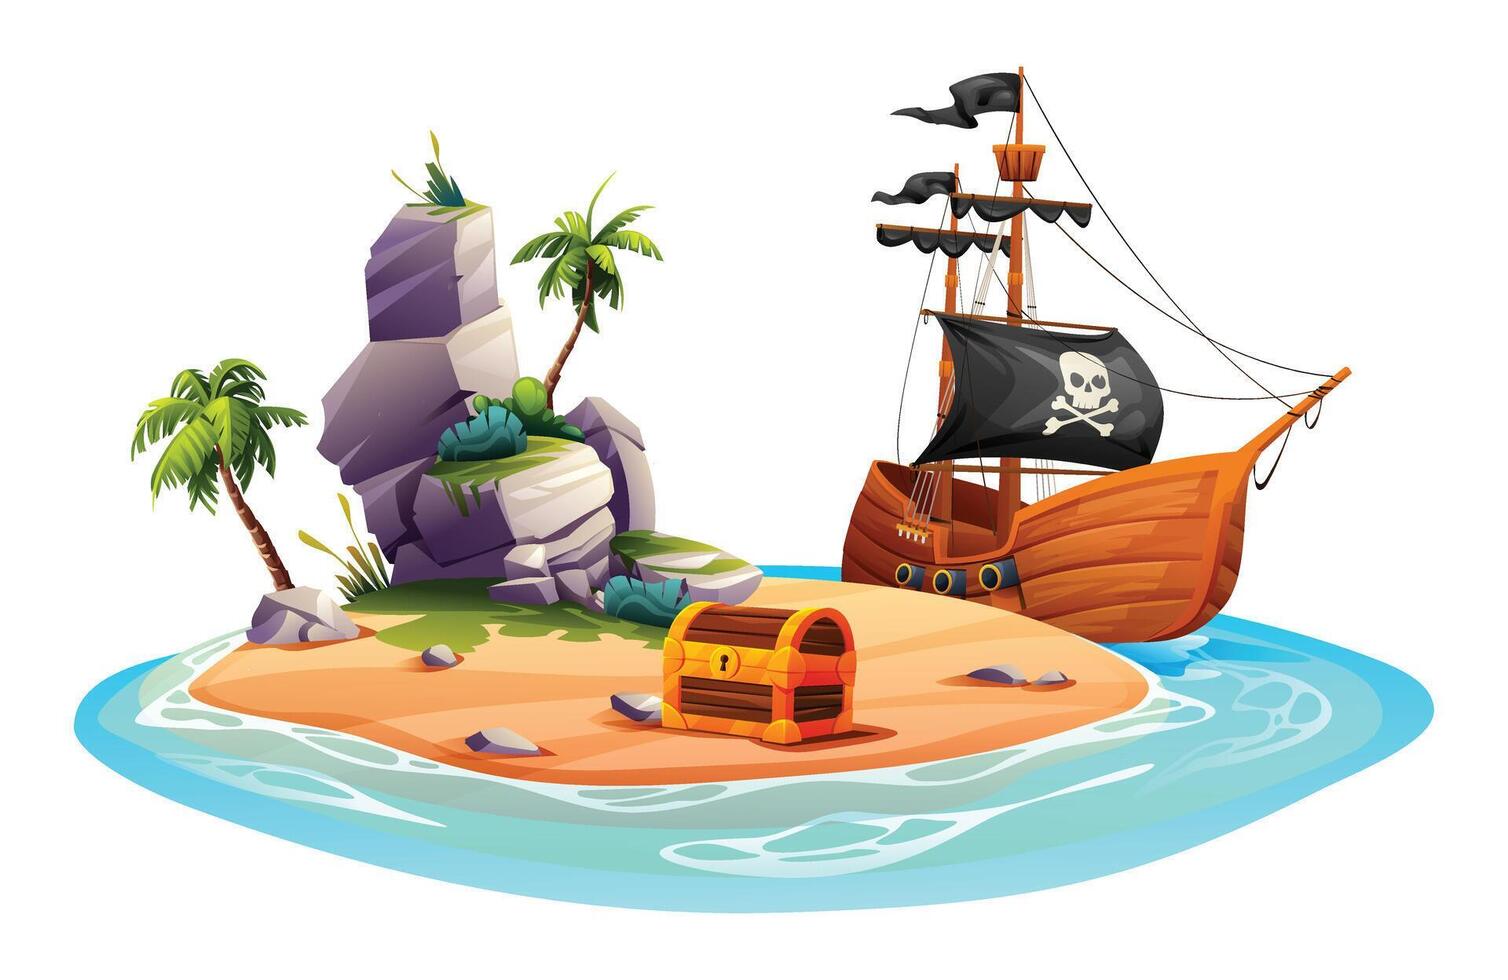 Tropical island with pirate ship, treasure chest, rocks and palm trees. Vector cartoon illustration isolated on white background